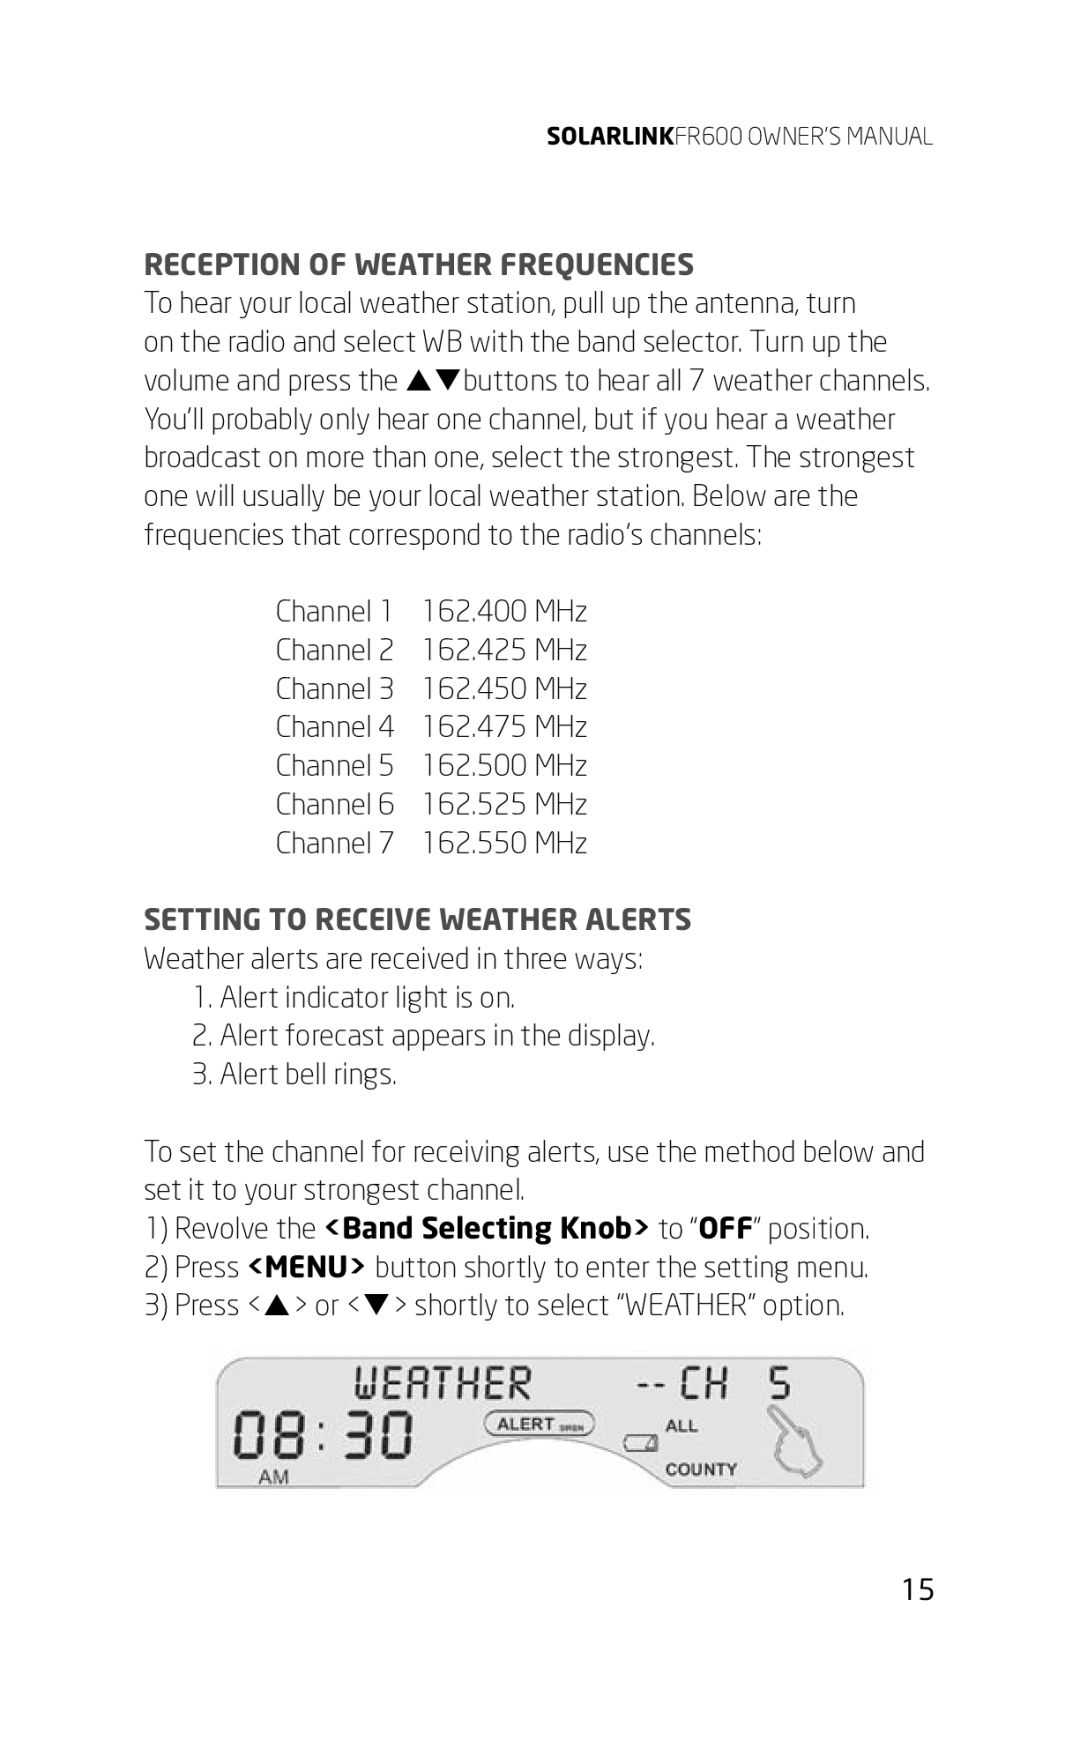 Eton FR600 owner manual Reception Of Weather Frequencies, Setting To Receive Weather Alerts 